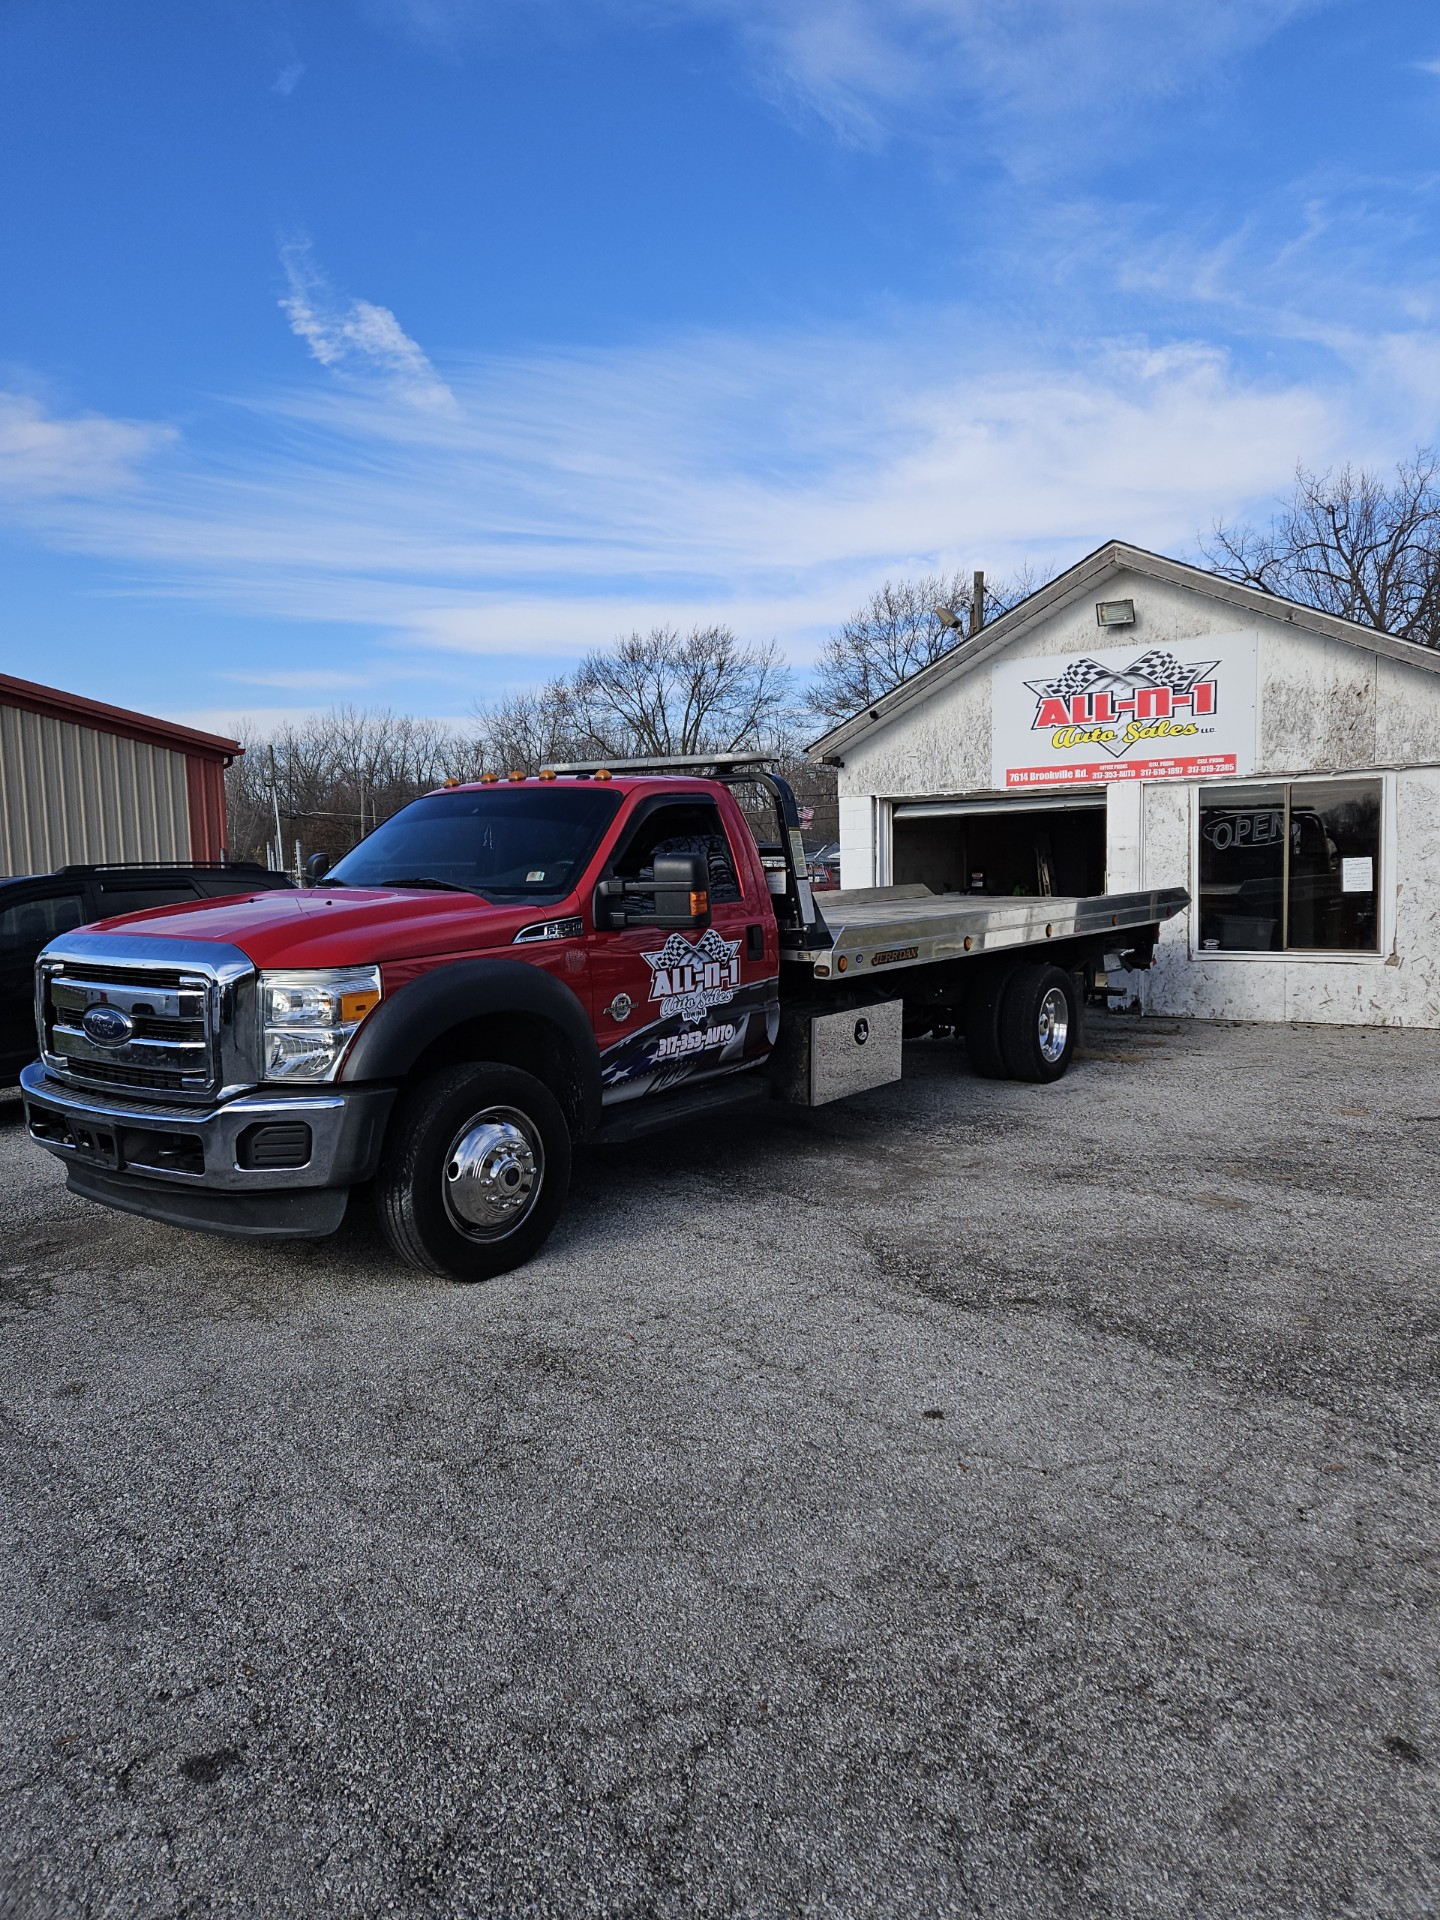 All-N-1 Auto Sales & Towing LLC